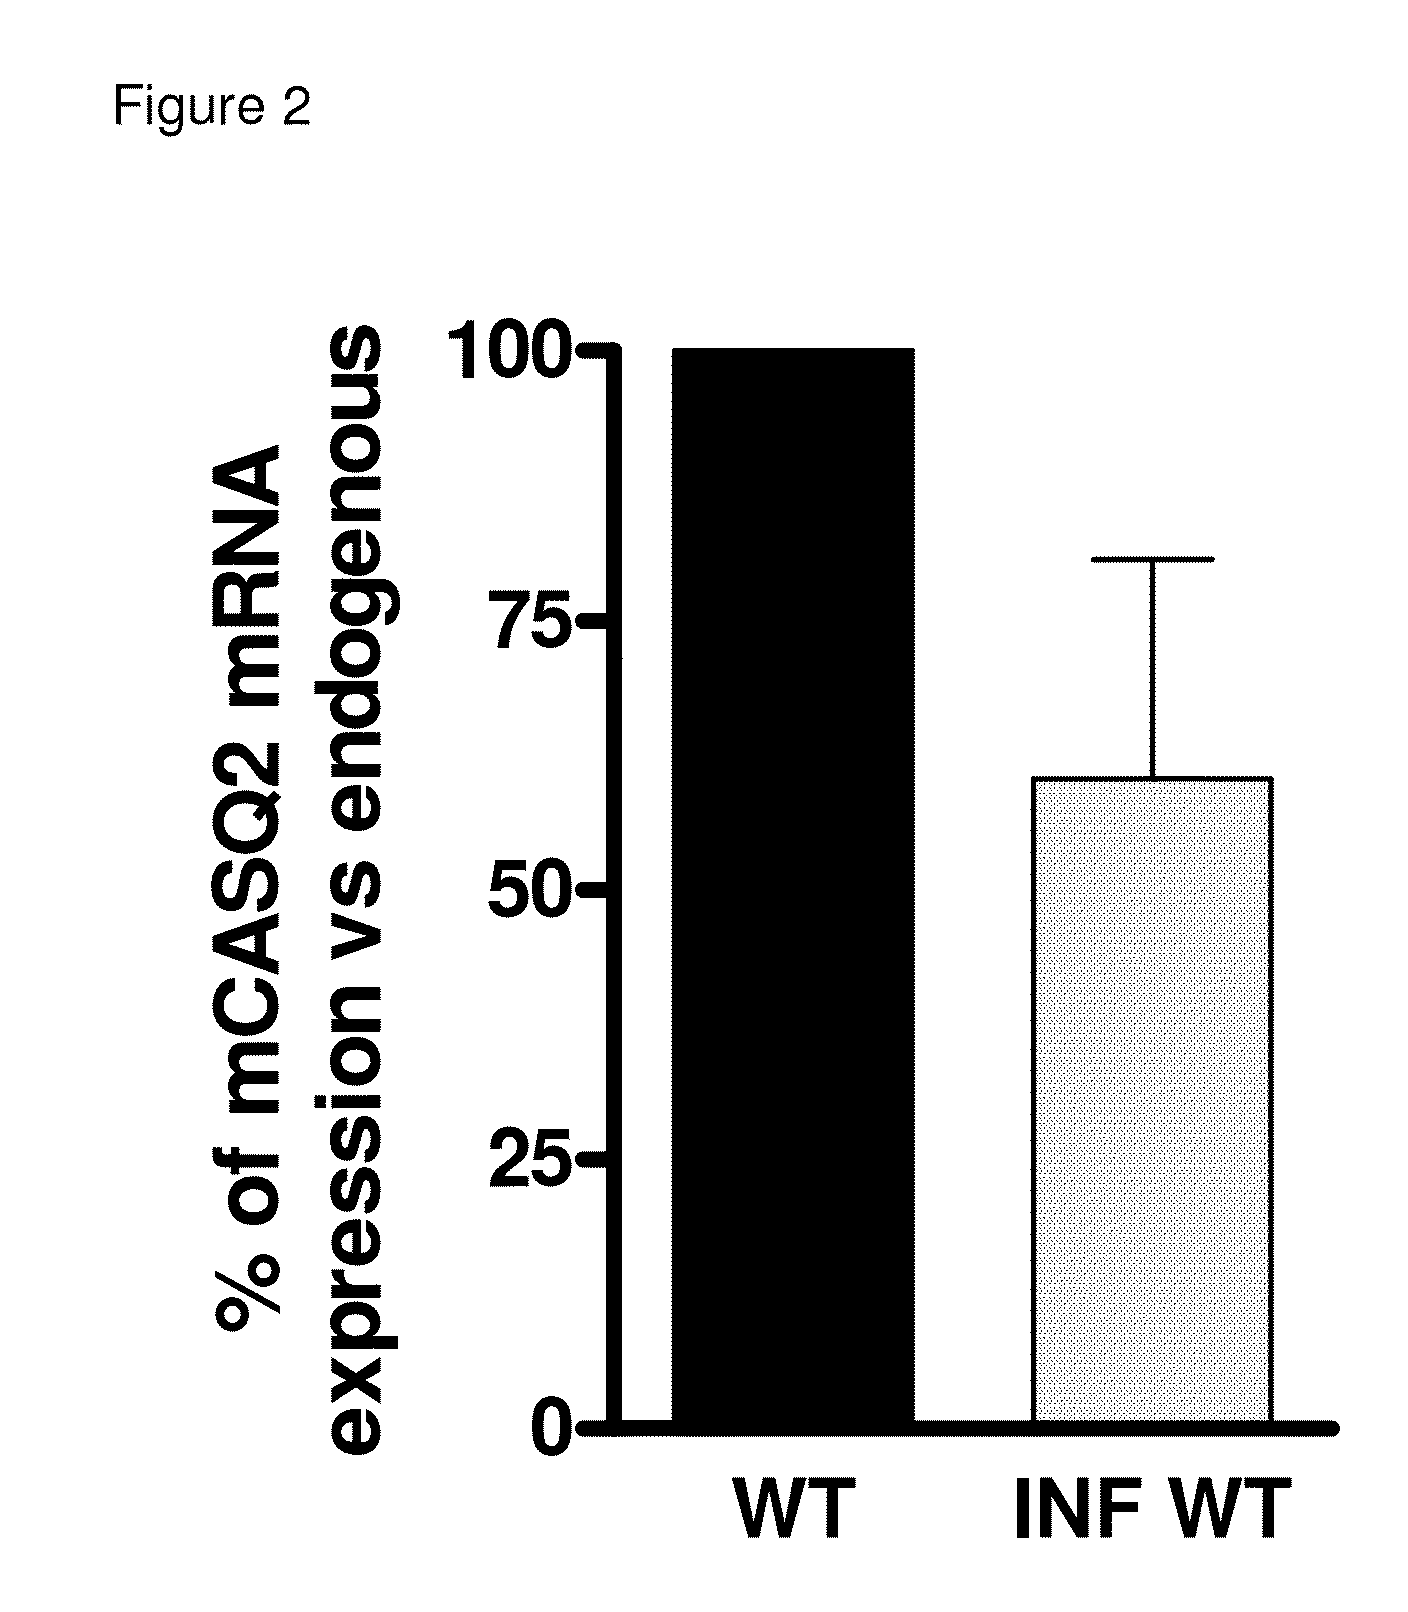 Method of Gene Transfer for the Treatment of Recessive Catecholaminergic Polymorphic Ventricular Tachycardia (CPVT)